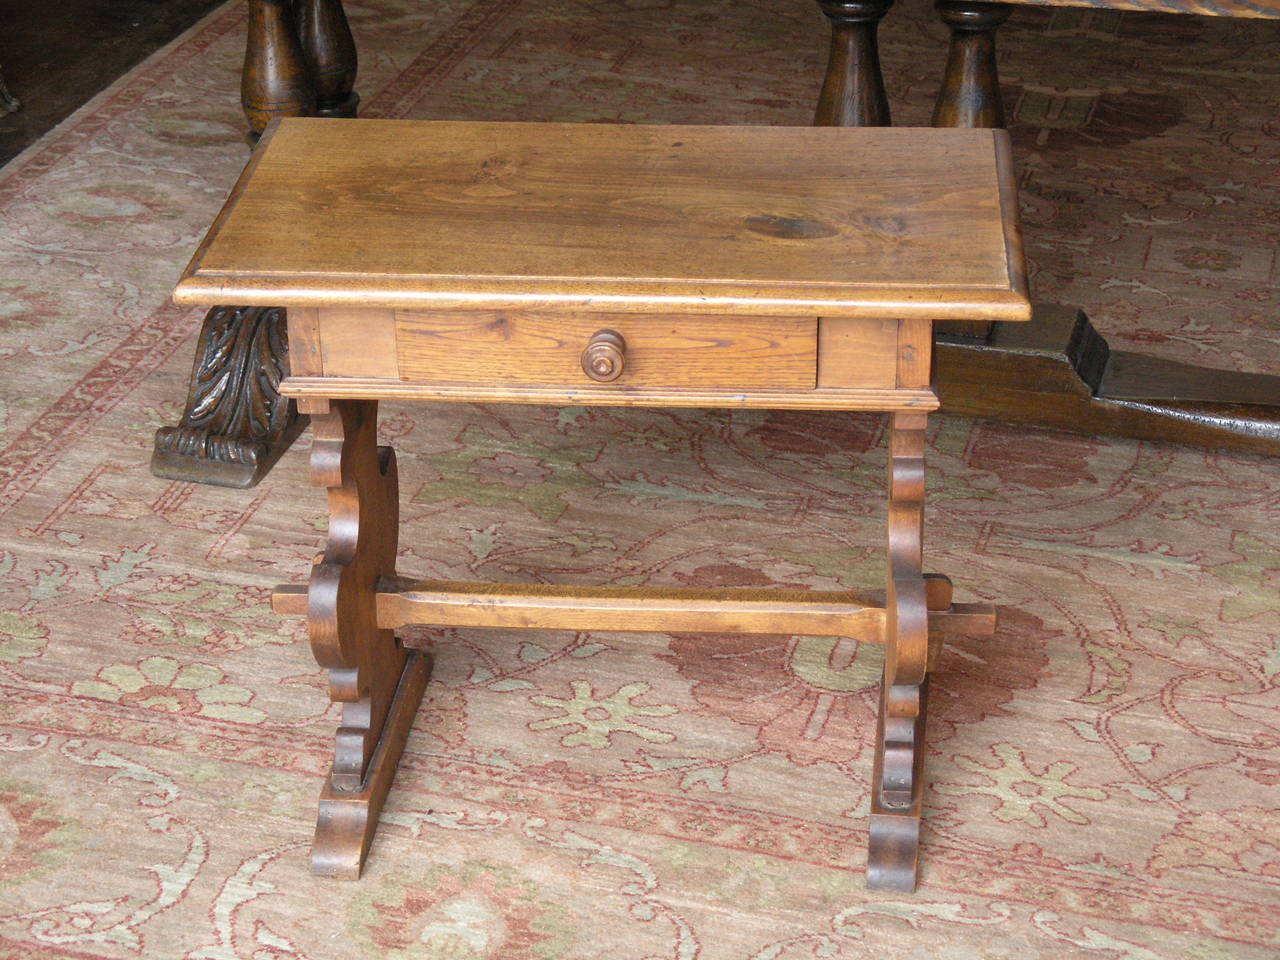 19th century Tuscan Baroque occasional table, walnut wood, carved legs, wooden cross stretcher single draw.